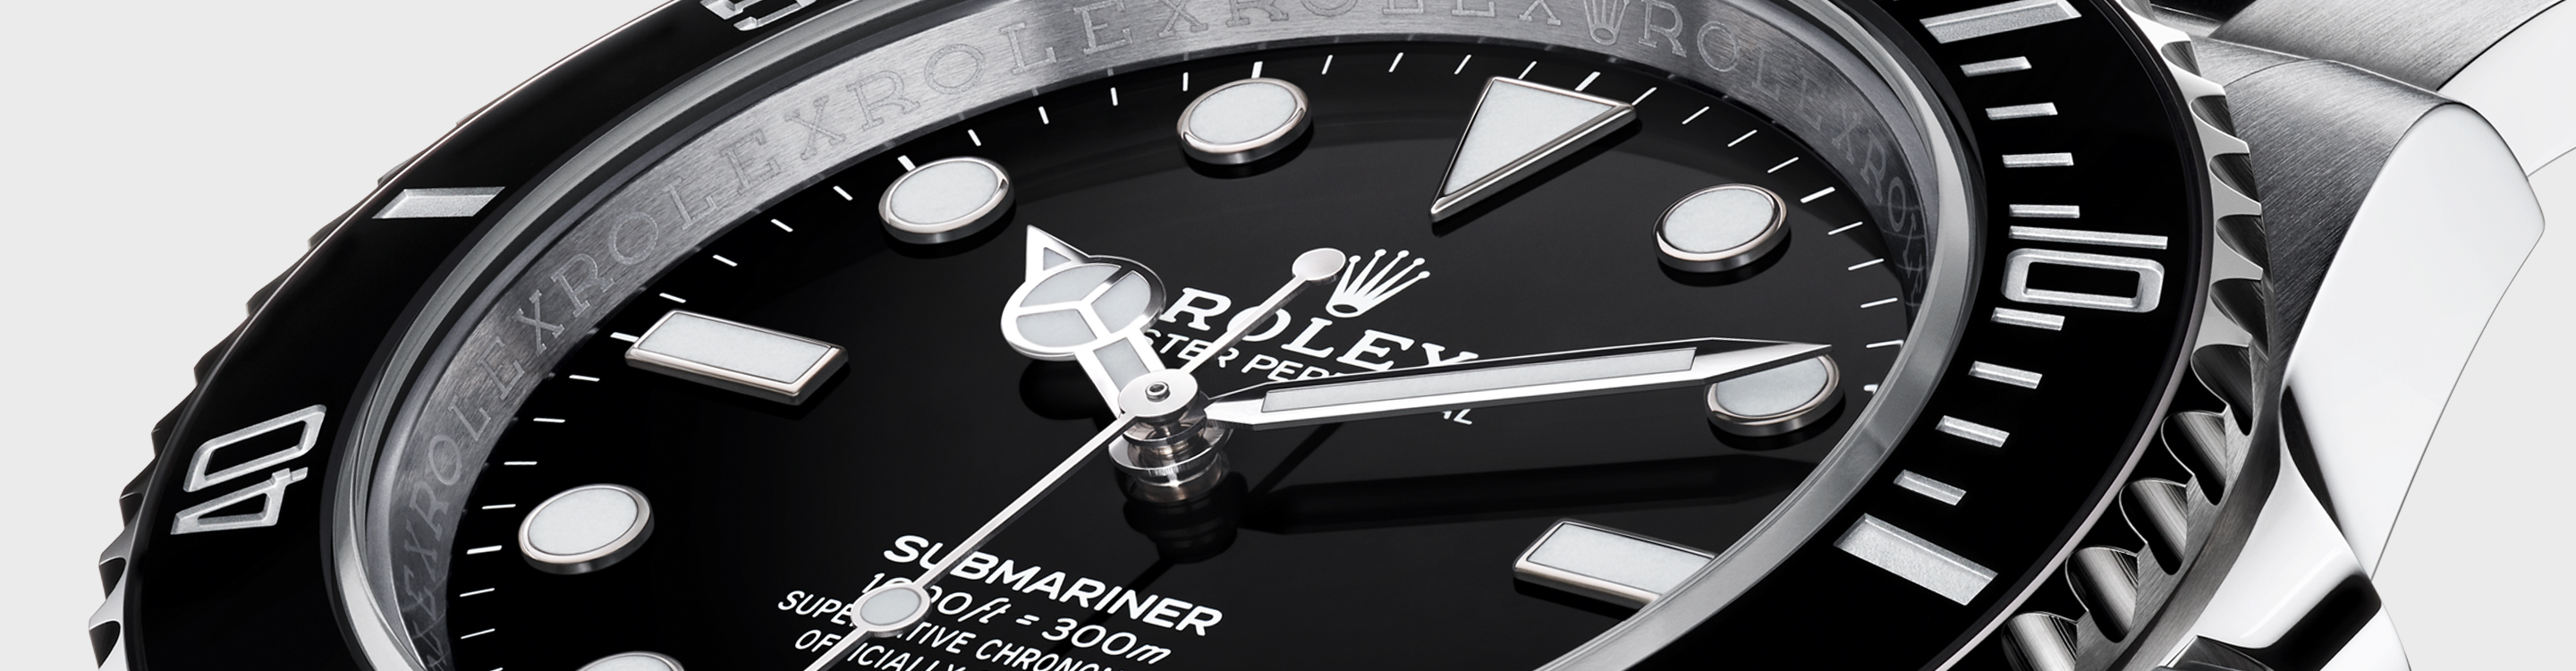 Close up of Rolex Submariner black watch dial